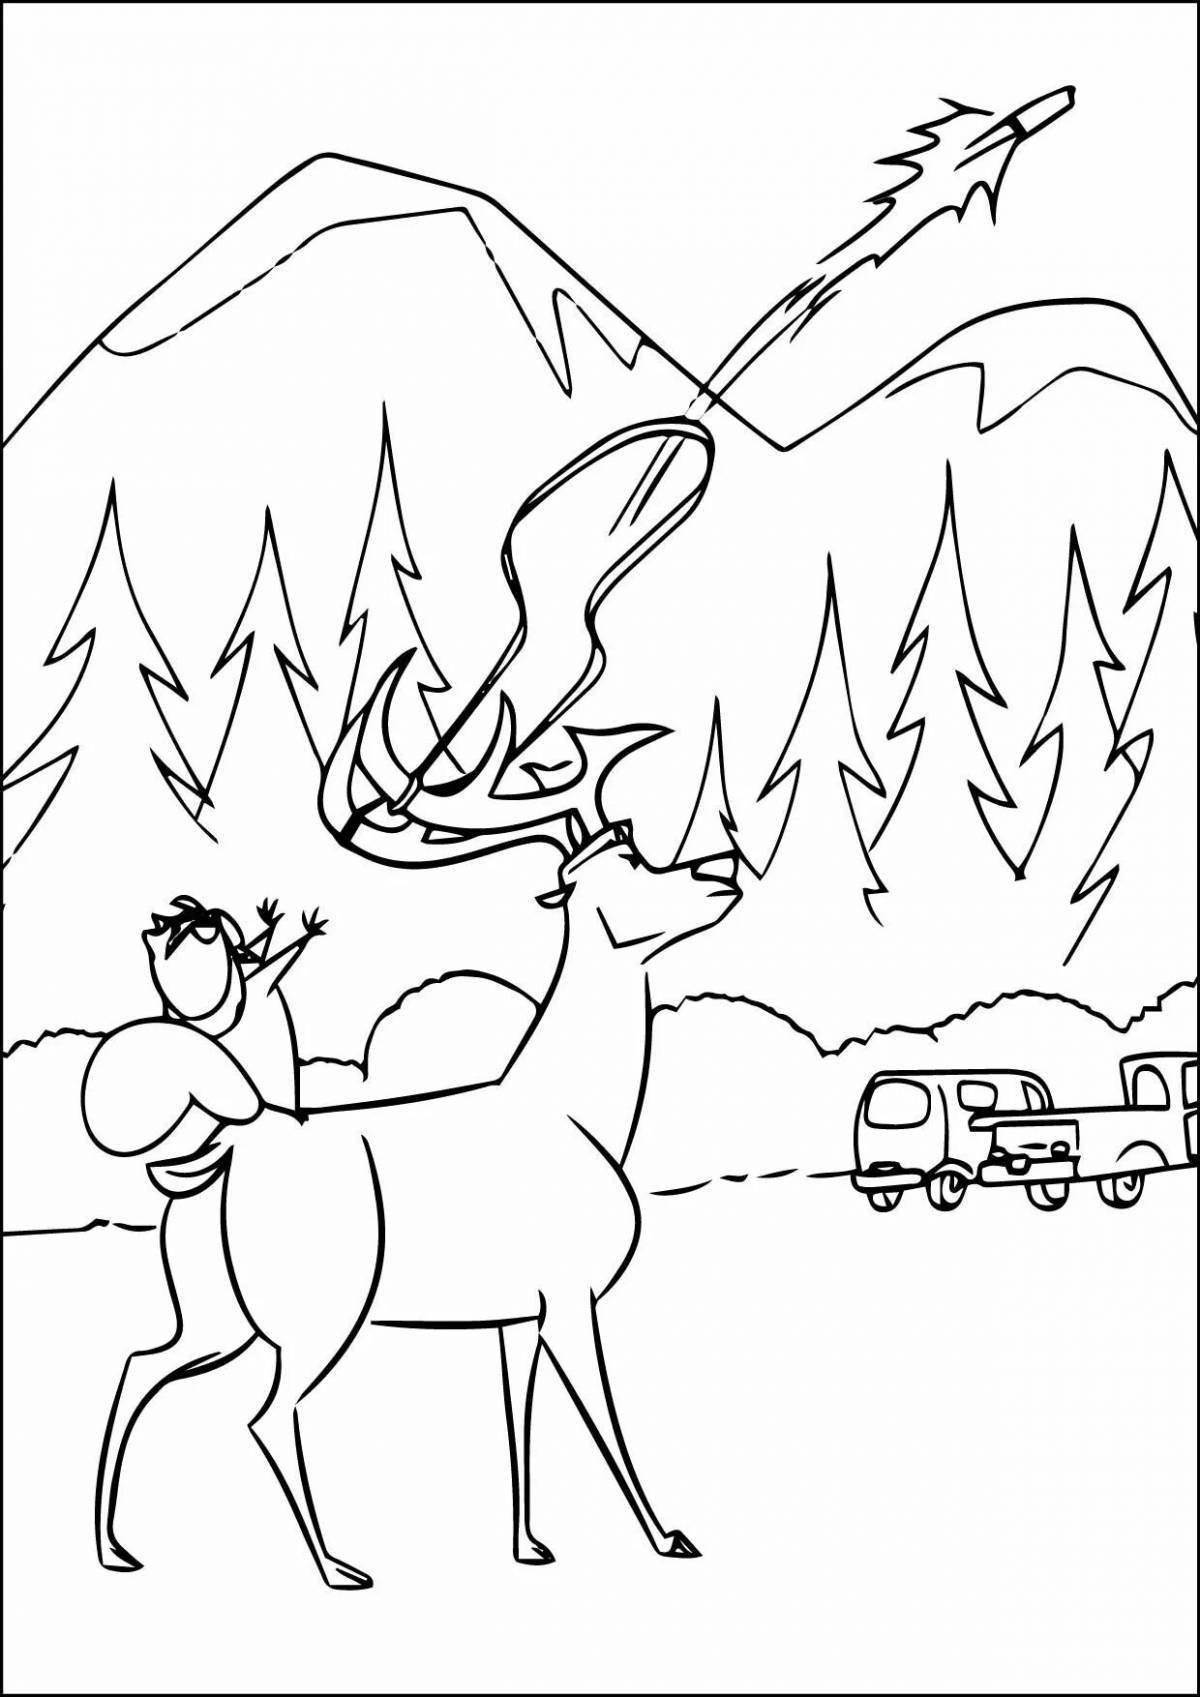 Flashing flames in the forest coloring page